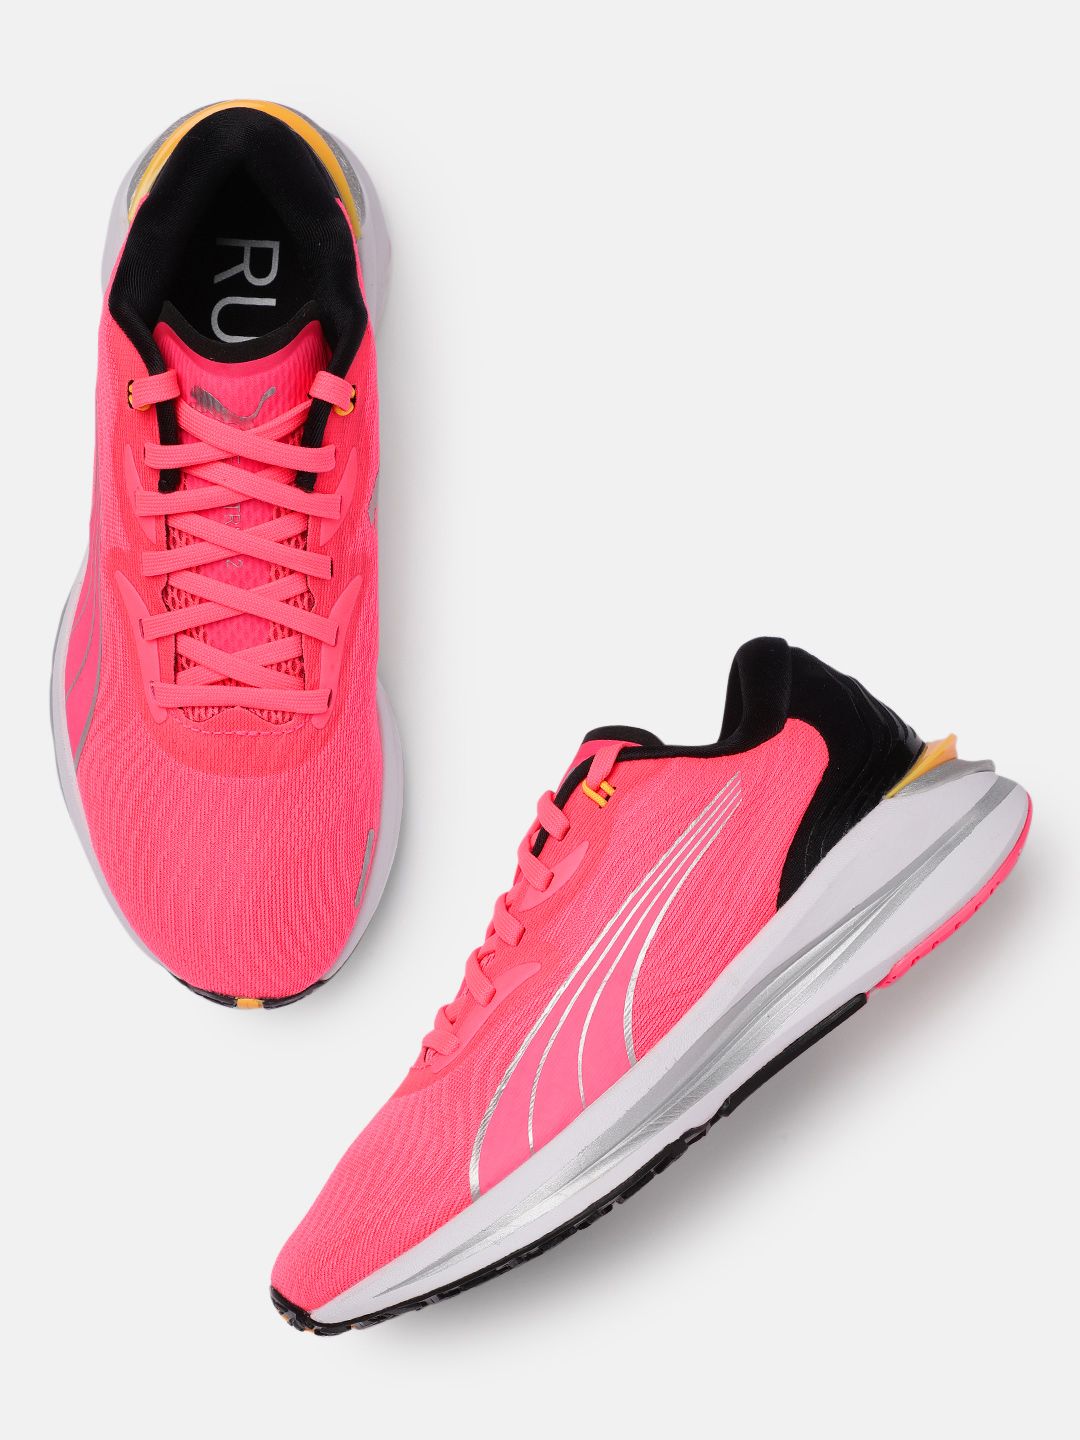 Puma Women Florescent Pink Electrify Nitro 2 Running Shoes Price in India